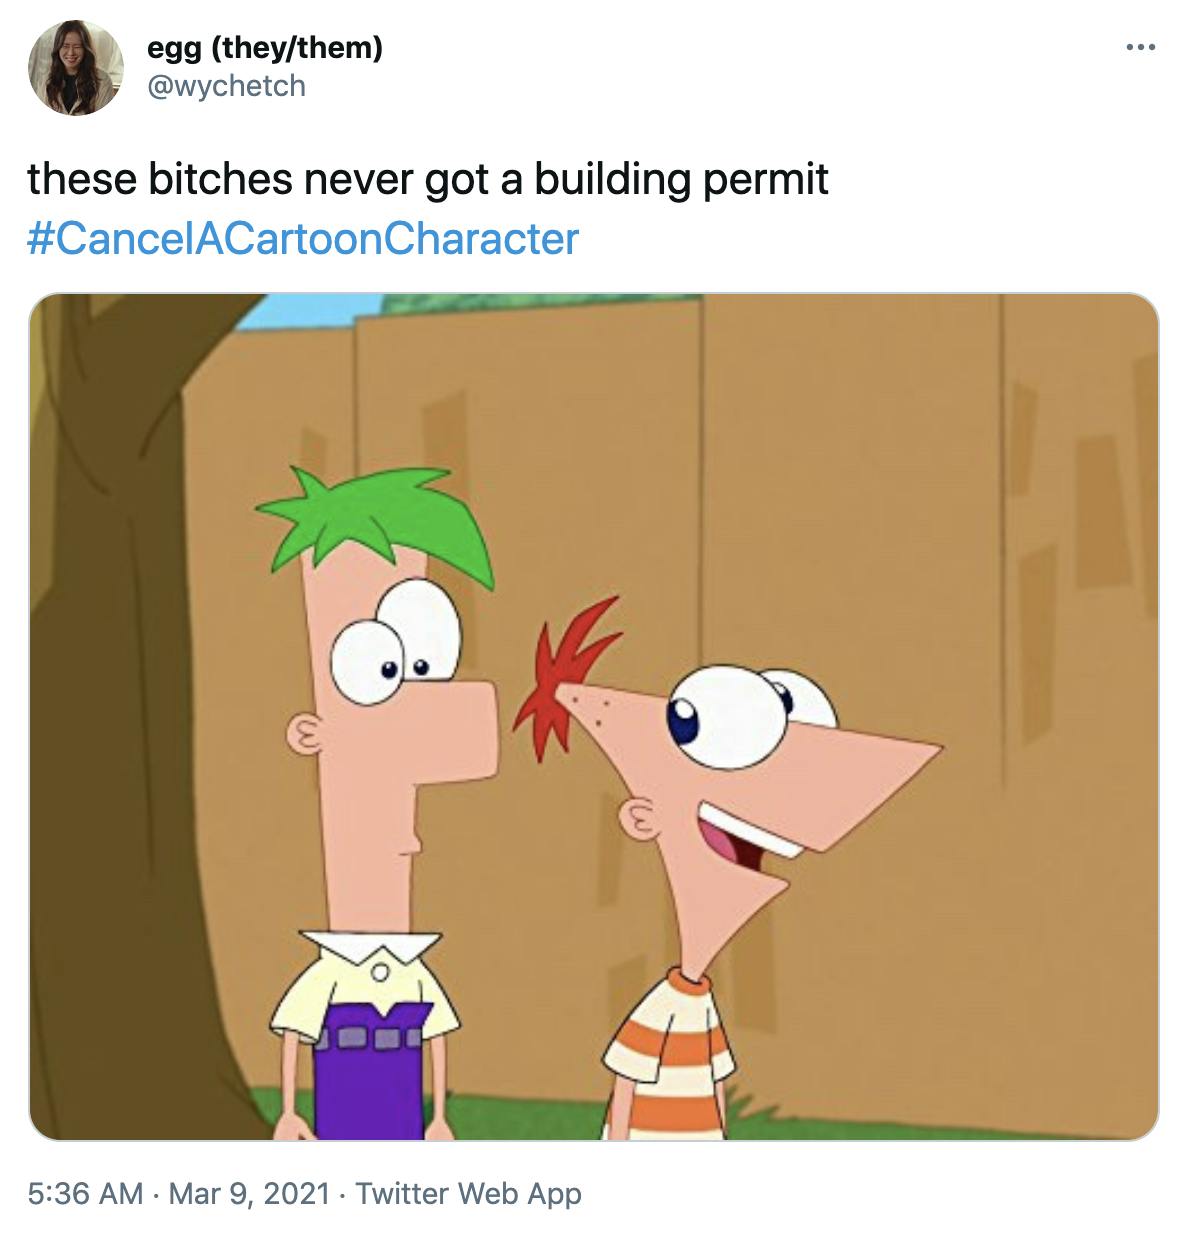 'these bitches never got a building permit #CancelACartoonCharacter' Phineas and Ferb stand in front of a fence, one has a rectangular head and green hair, the other has a triangular head and red hair